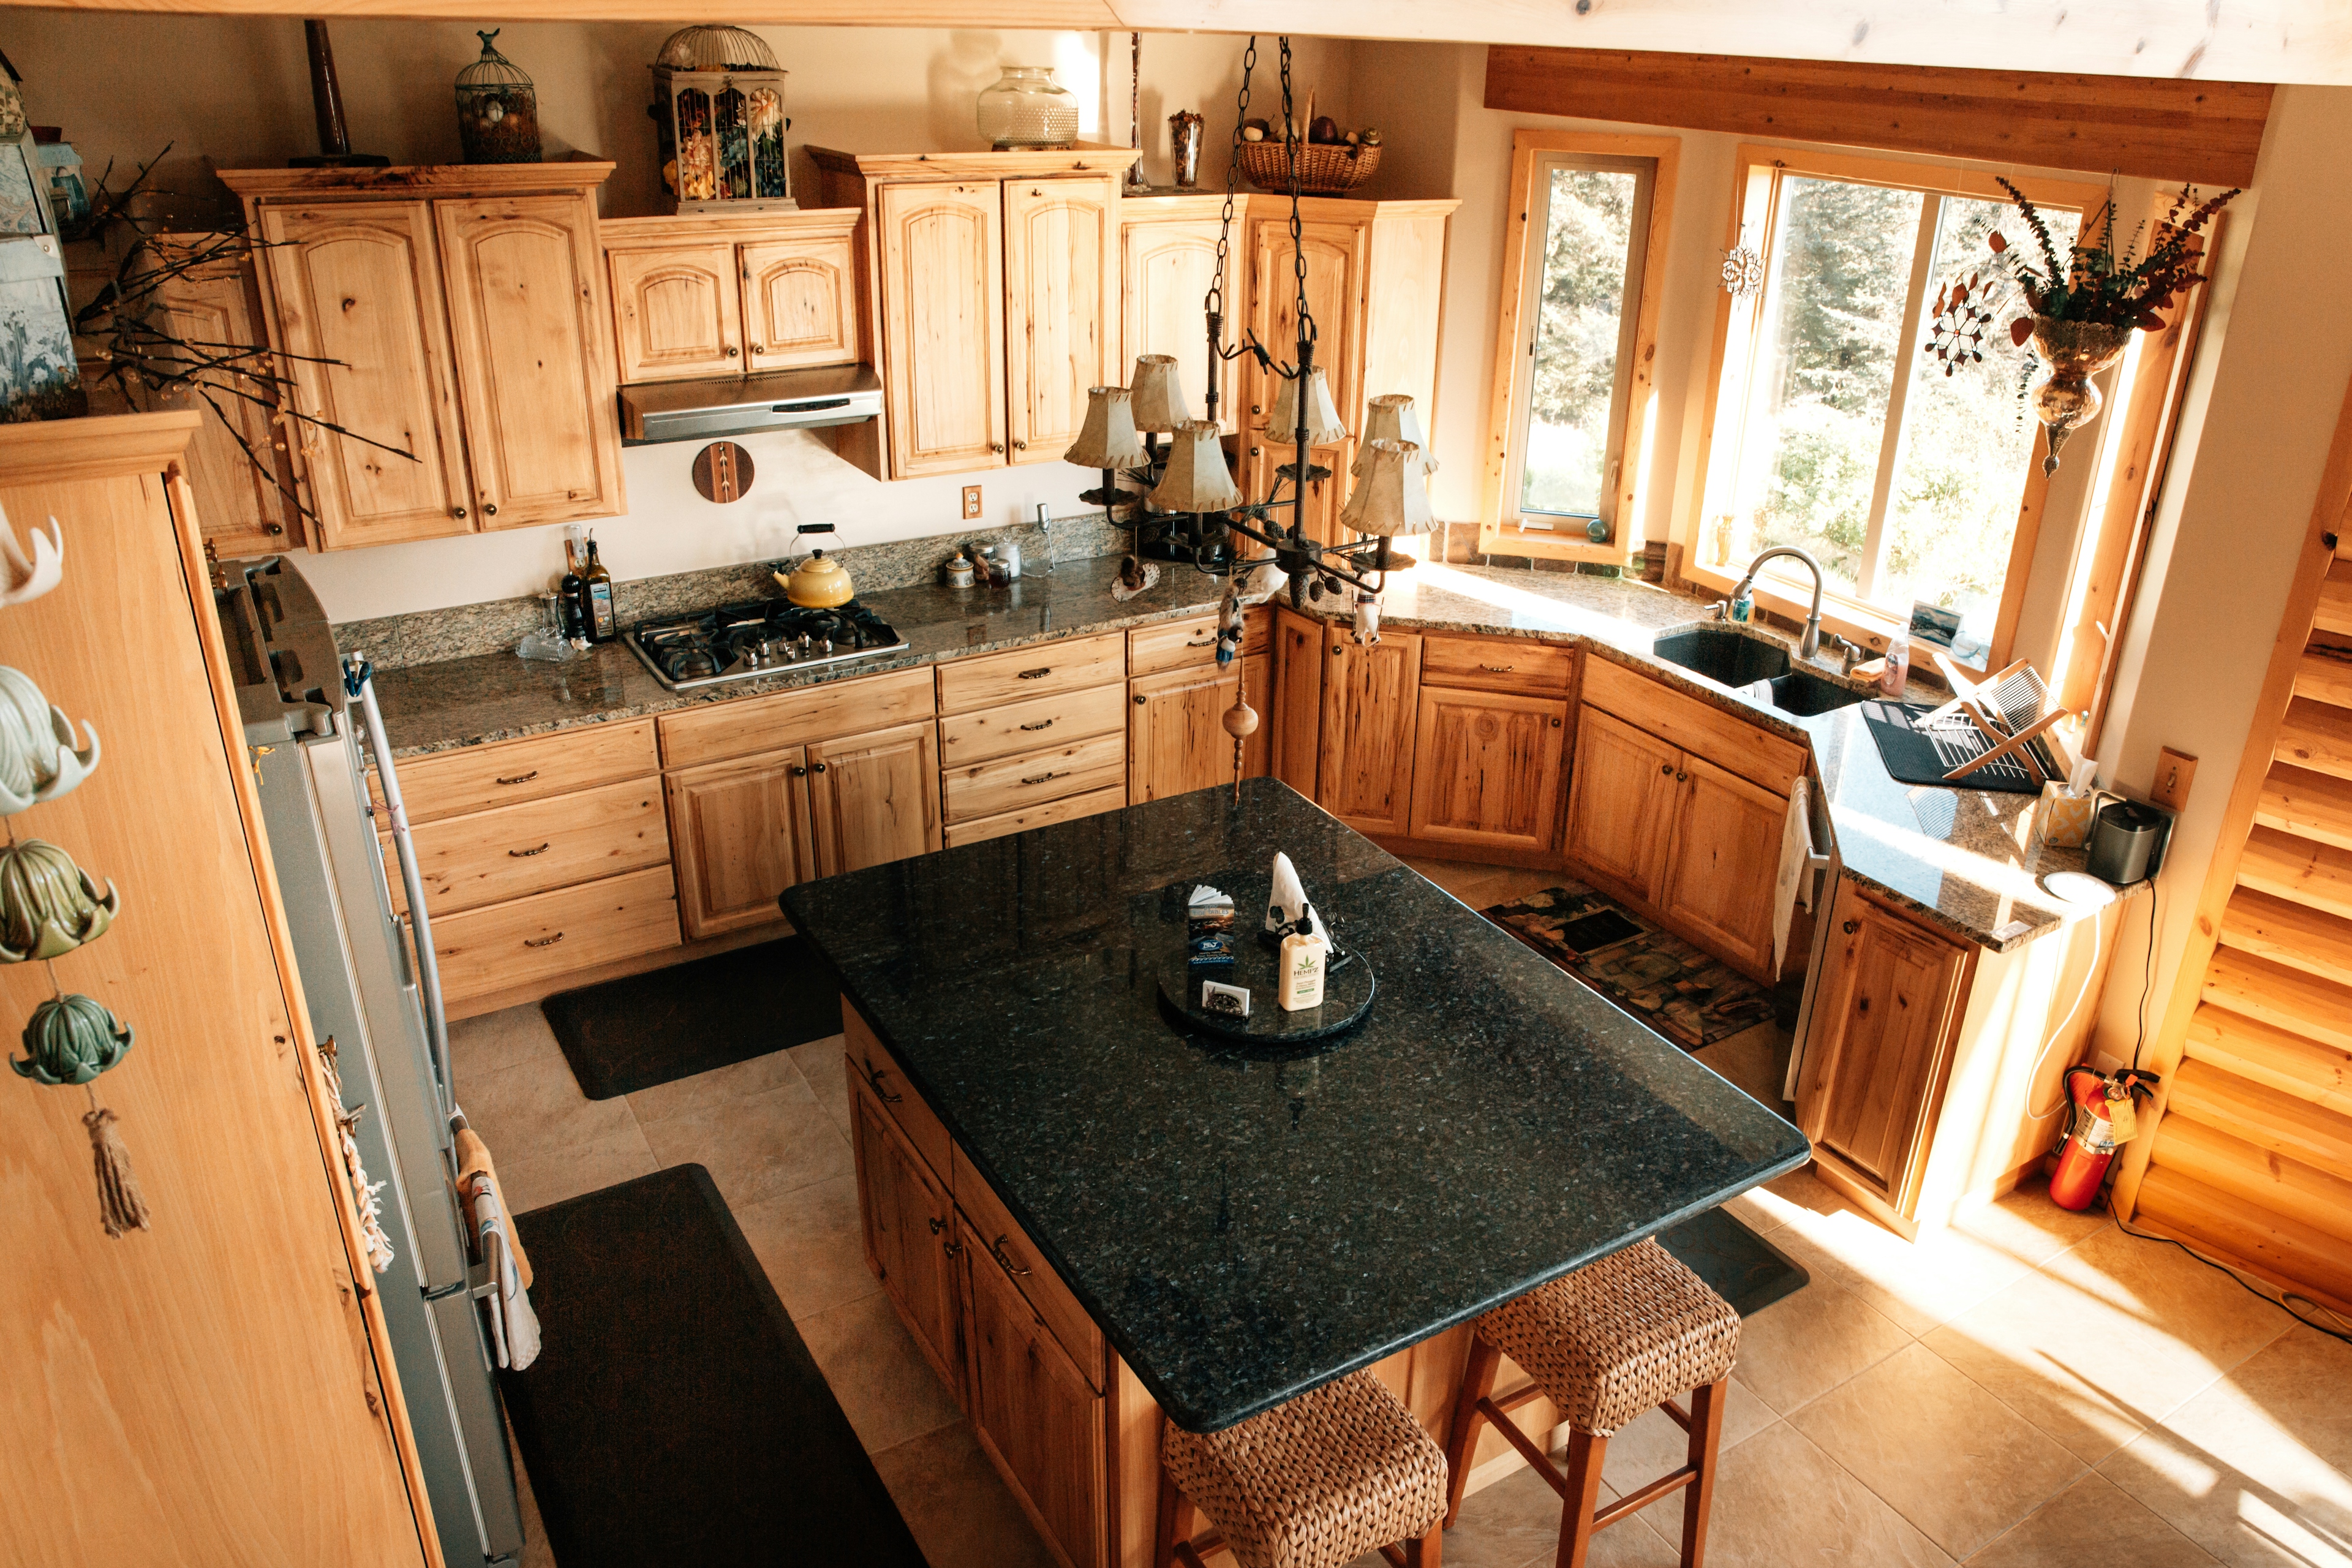 Overhead view of fully equipped kitchen with refrigerator, beautiful wood cabinetry, and island in the middle